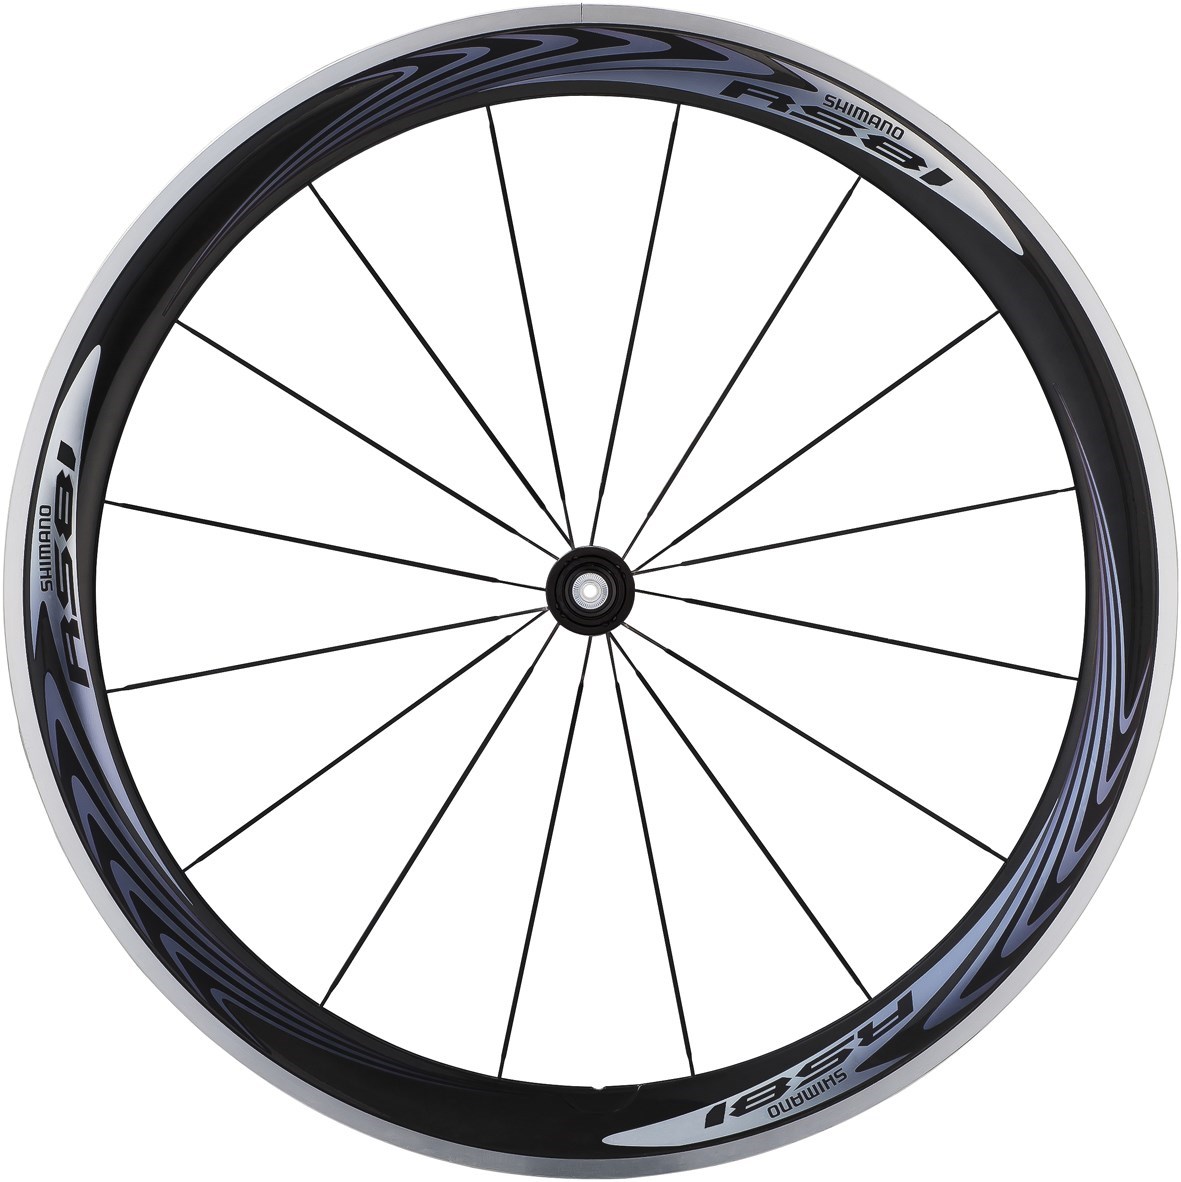 Shimano WH-RS81-C50-CL Wheel - Carbon Clincher 50 mm - Front product image